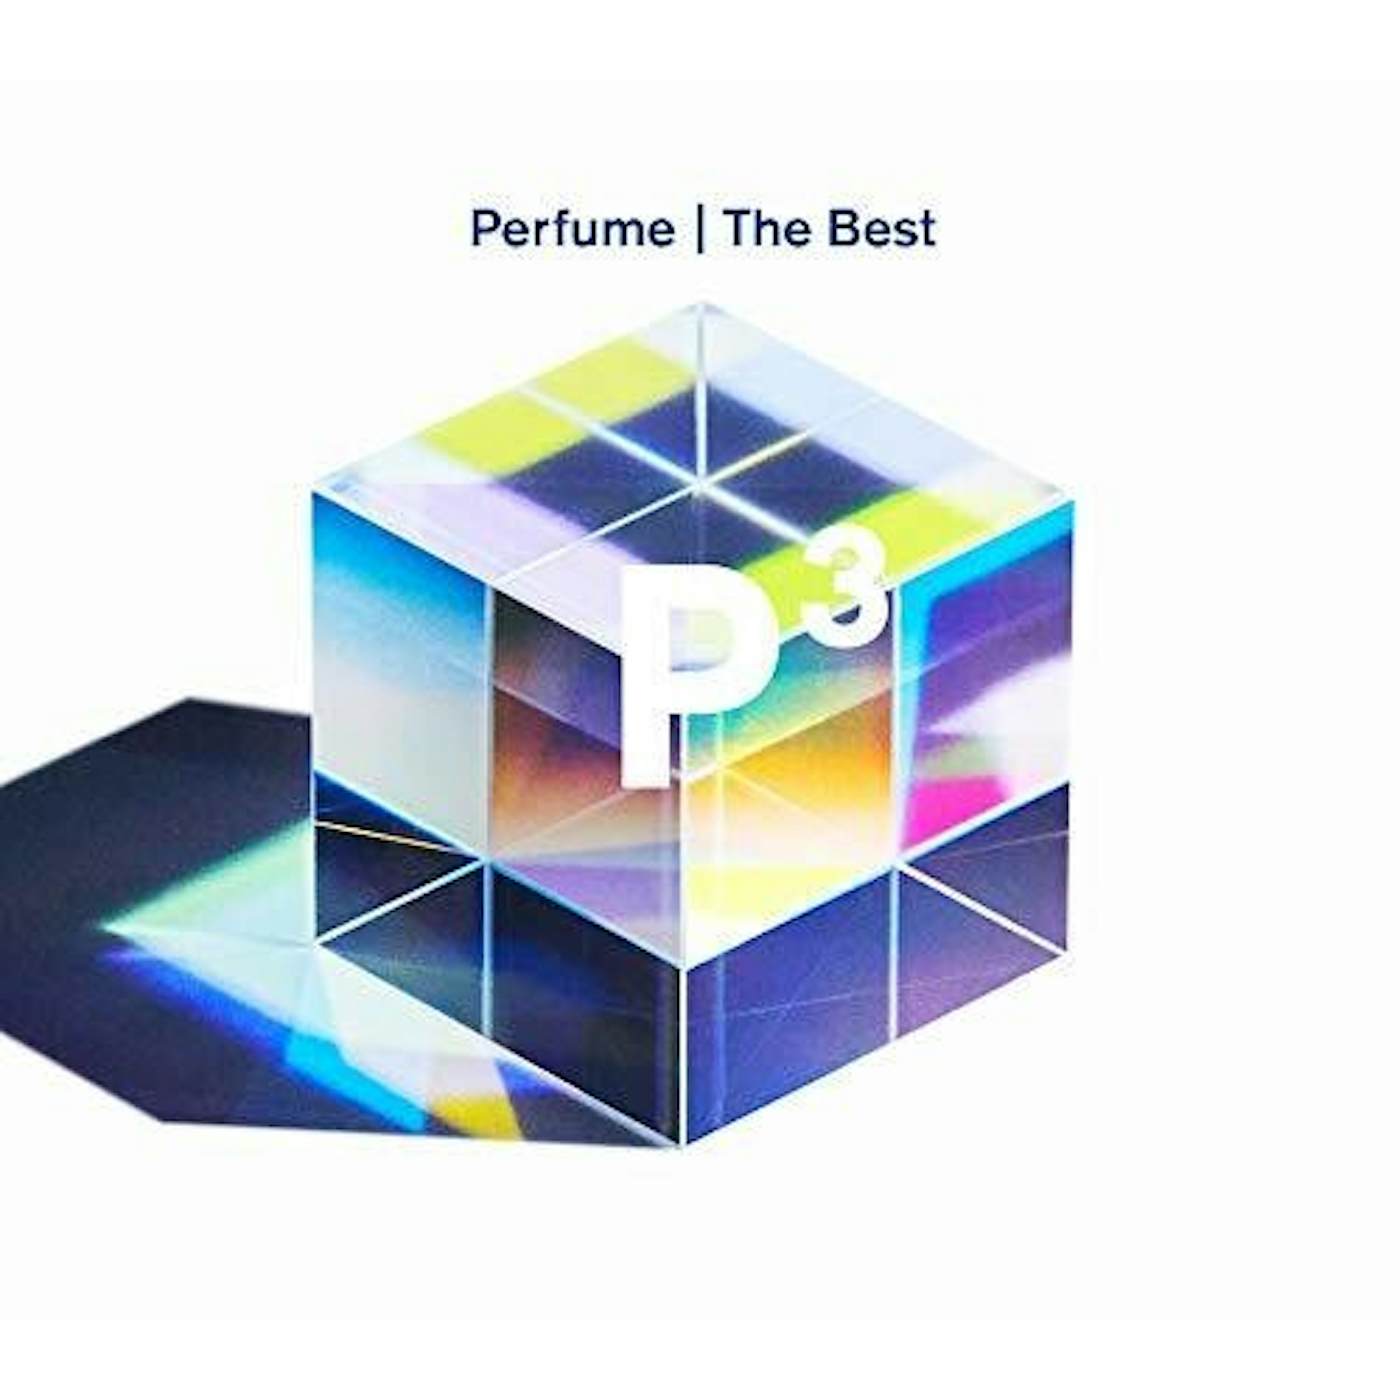 PERFUME THE BEST P CUBED CD